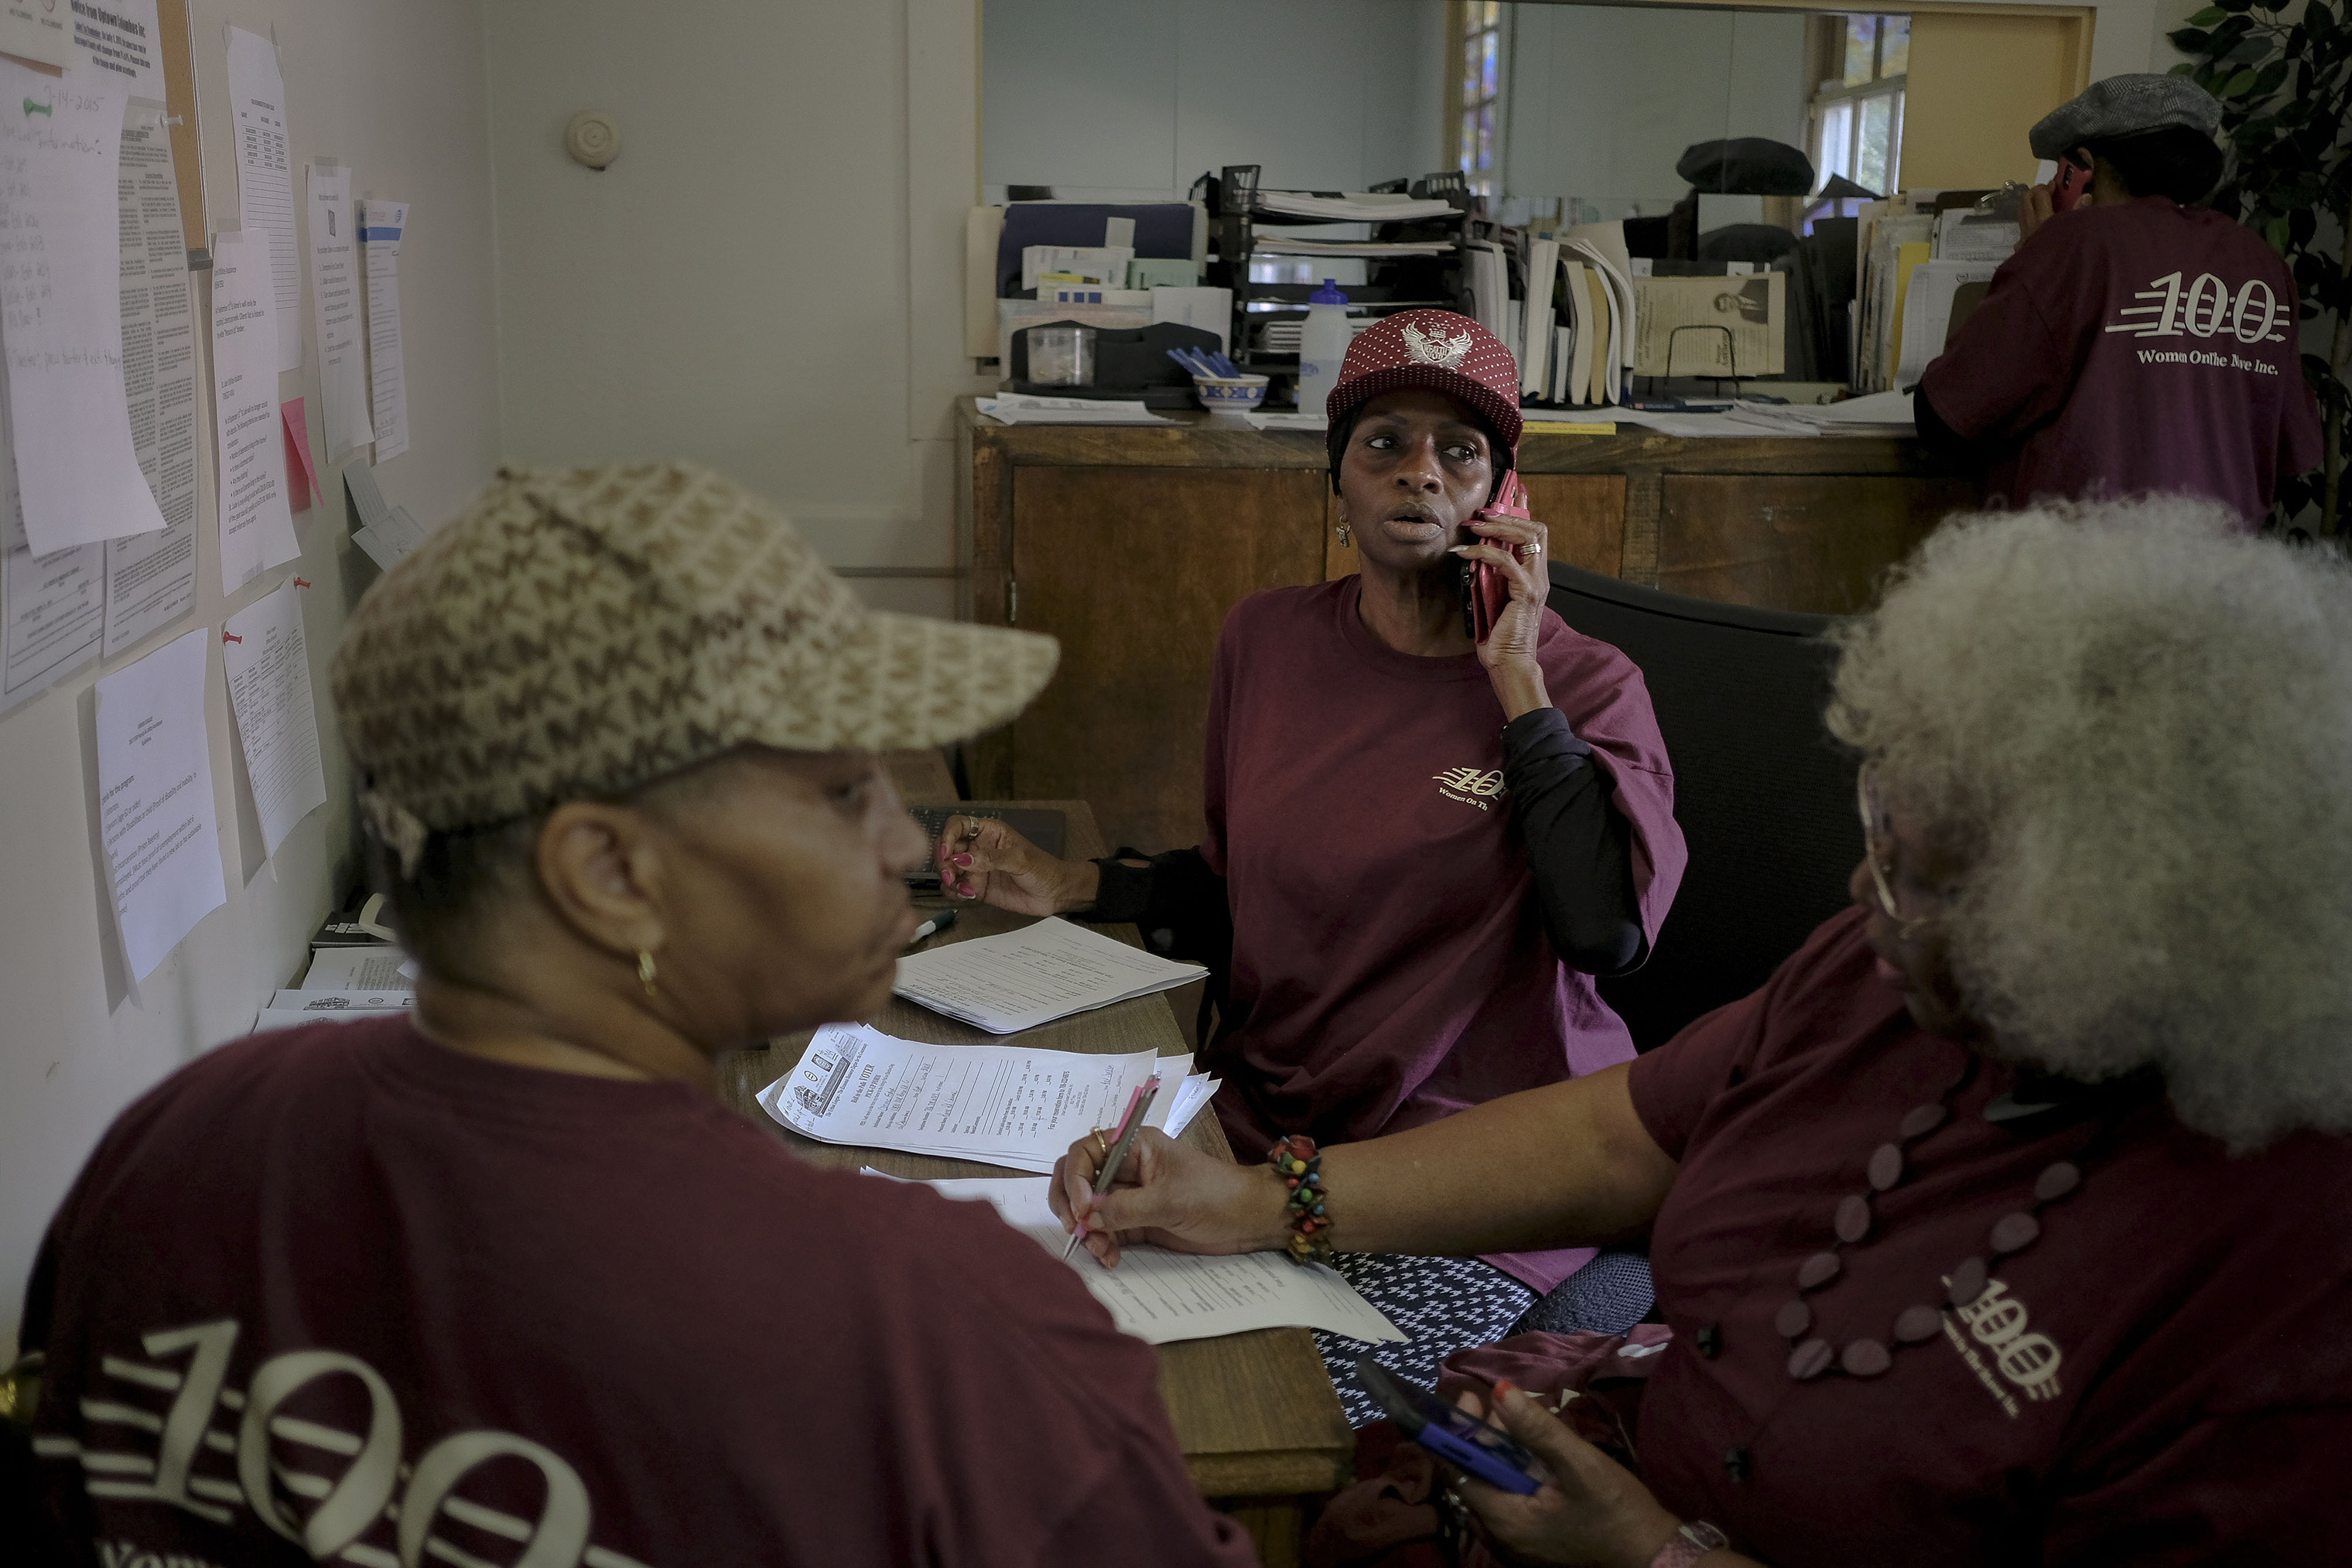 Members of Women on the Move confirm registration and polling precincts with callers at the Urban League of Greater Columbus in Columbus, Ga. on election day, Nov. 6, 2018. (Gabriella Demczuk for TIME)